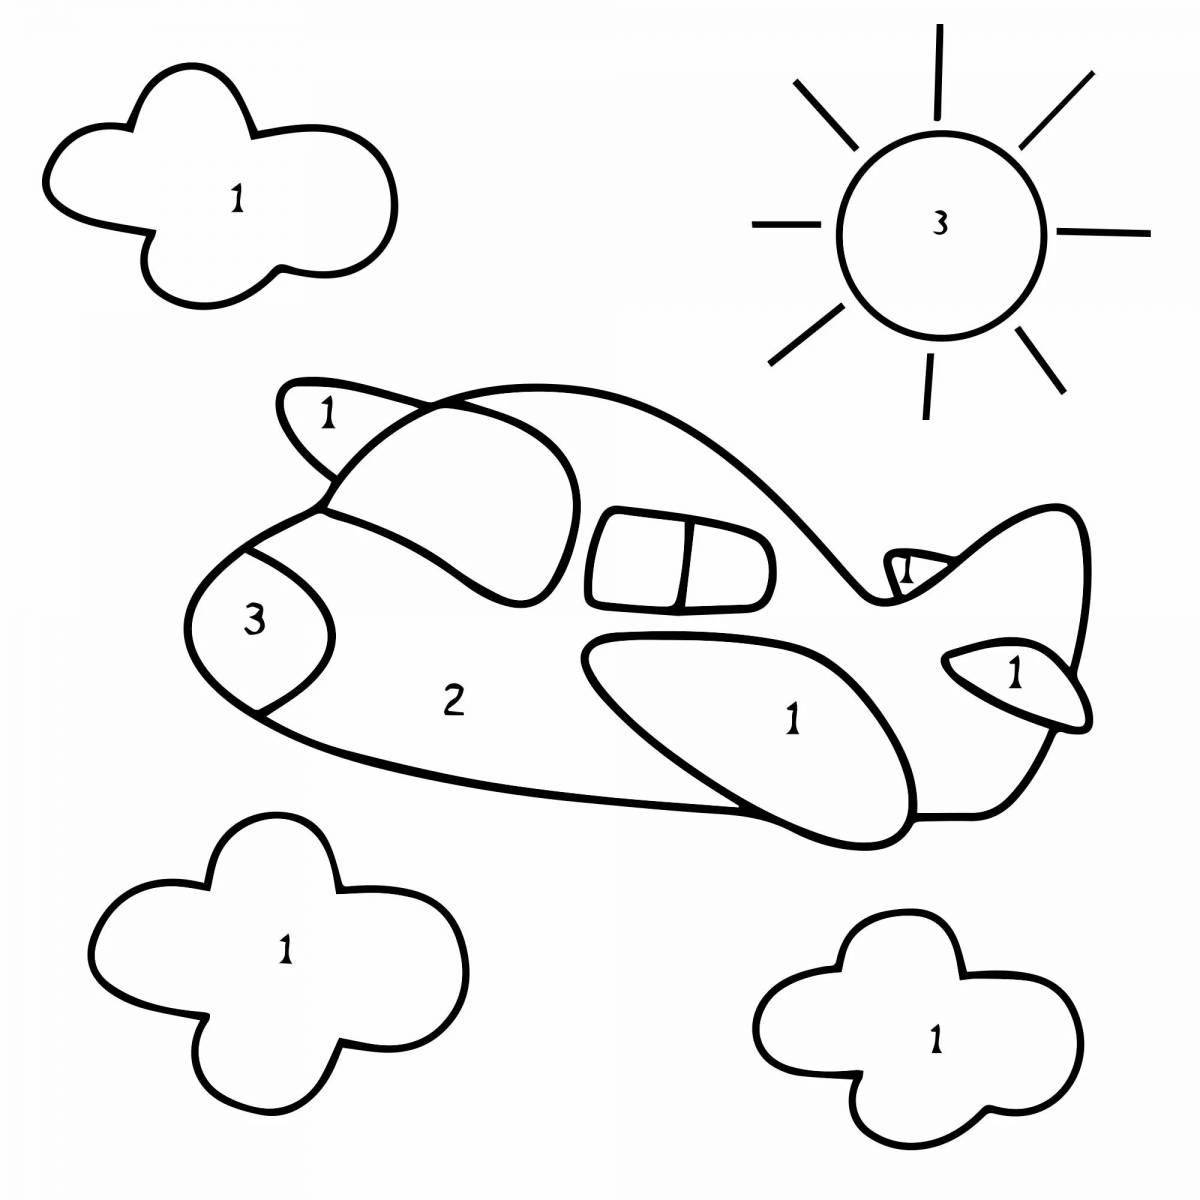 Animated airplane coloring page